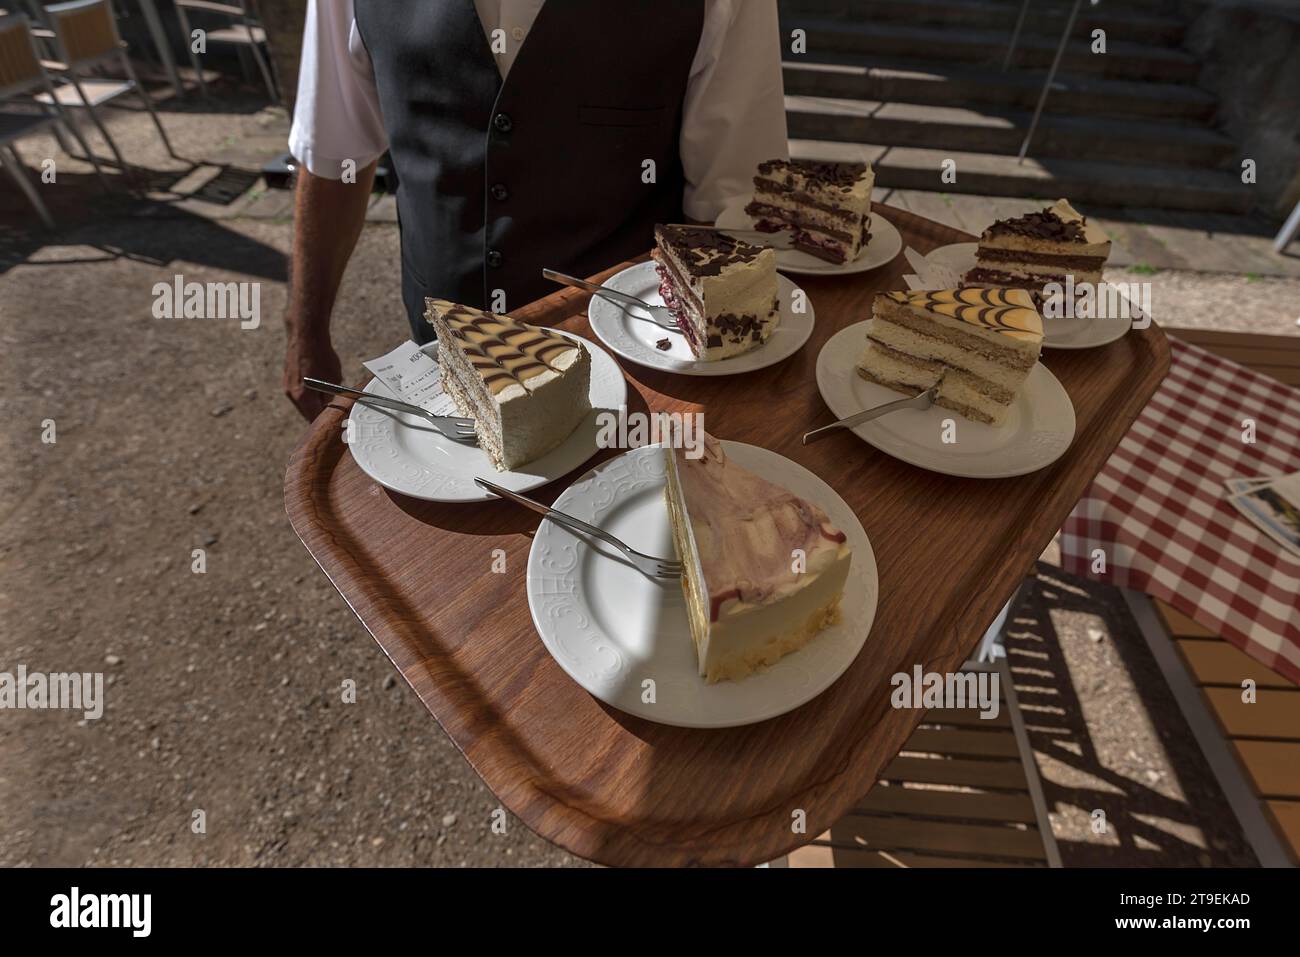 Waitress brings various pieces of cake on a tray to the guests, Bavaria, Germany Stock Photo